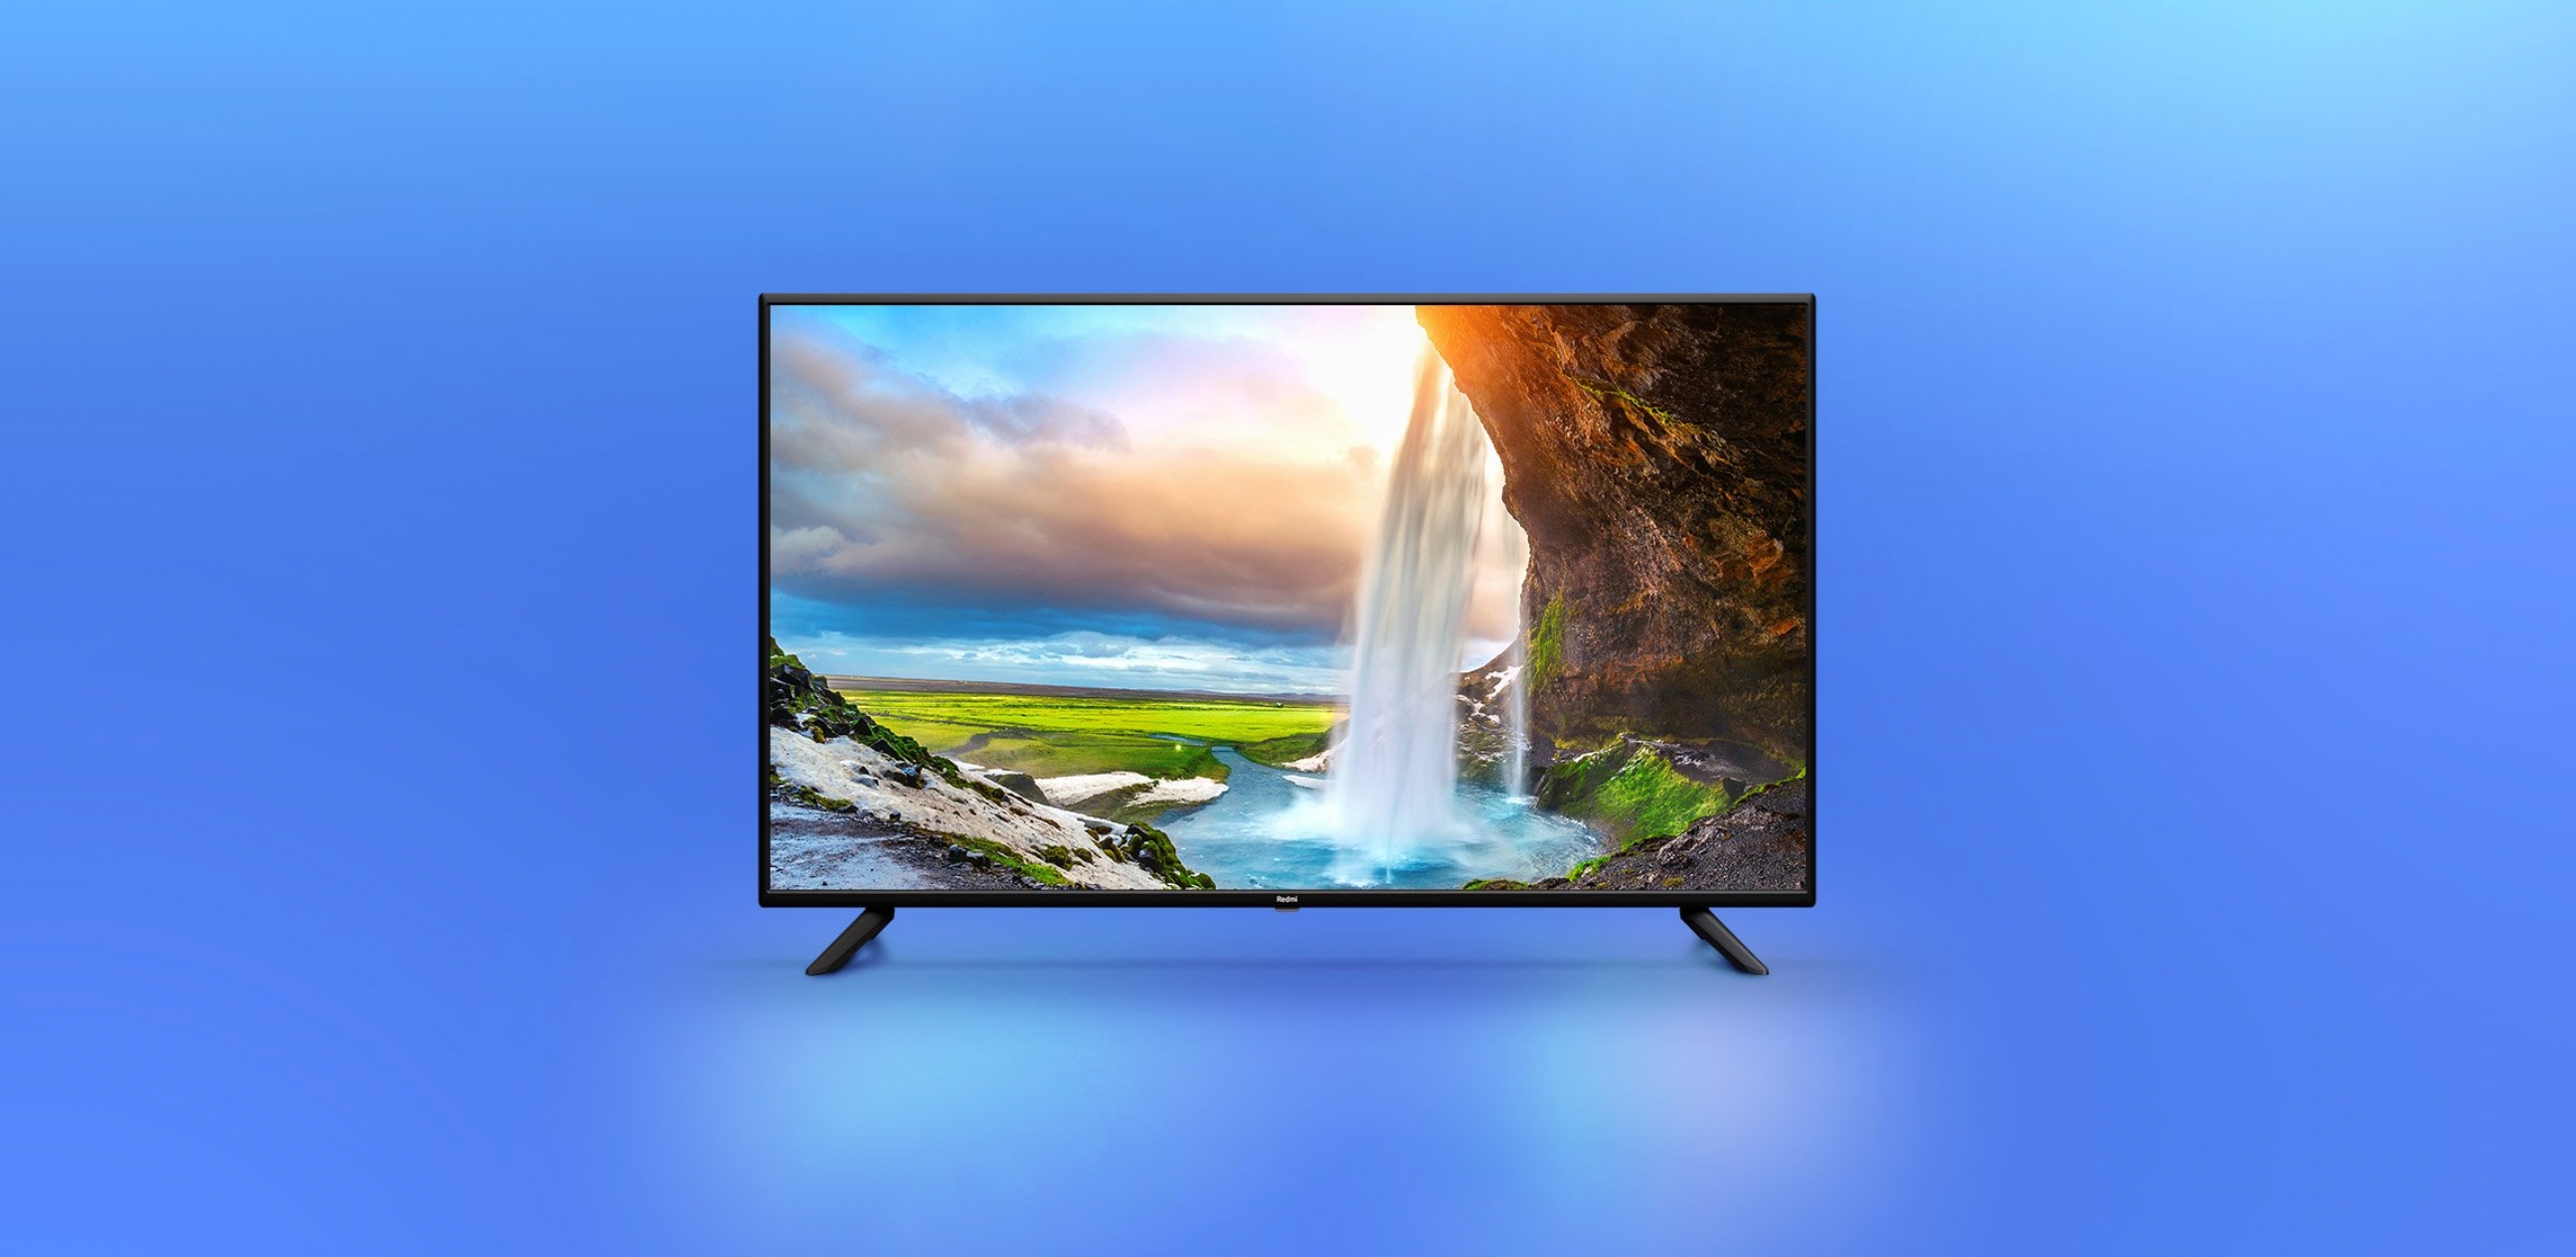 Redmi Smart TV: a line of budget smart TVs with 32/43-inch screens and Android TV 11 OS starting at $216